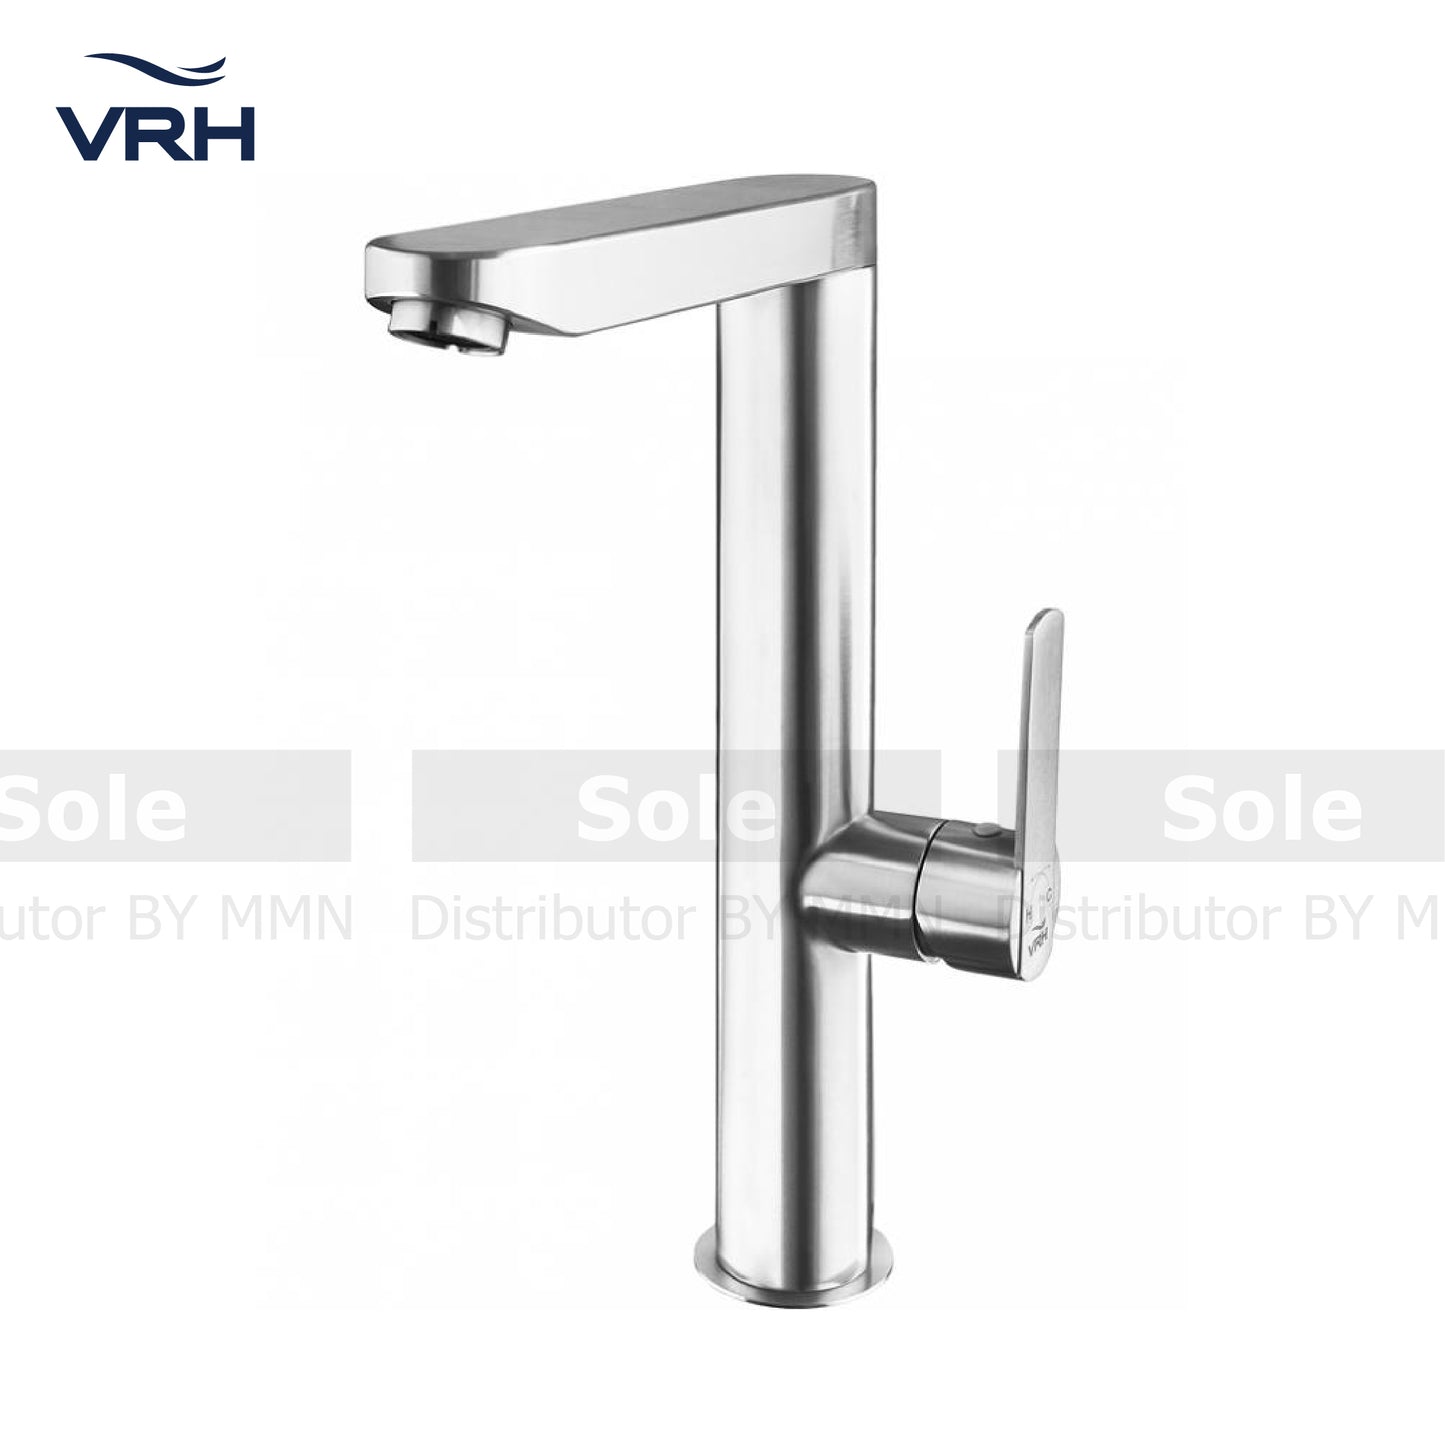 VRH Deck Single Control Mixer Sink Faucet, Stainless Steel - HFVSP.1001H5